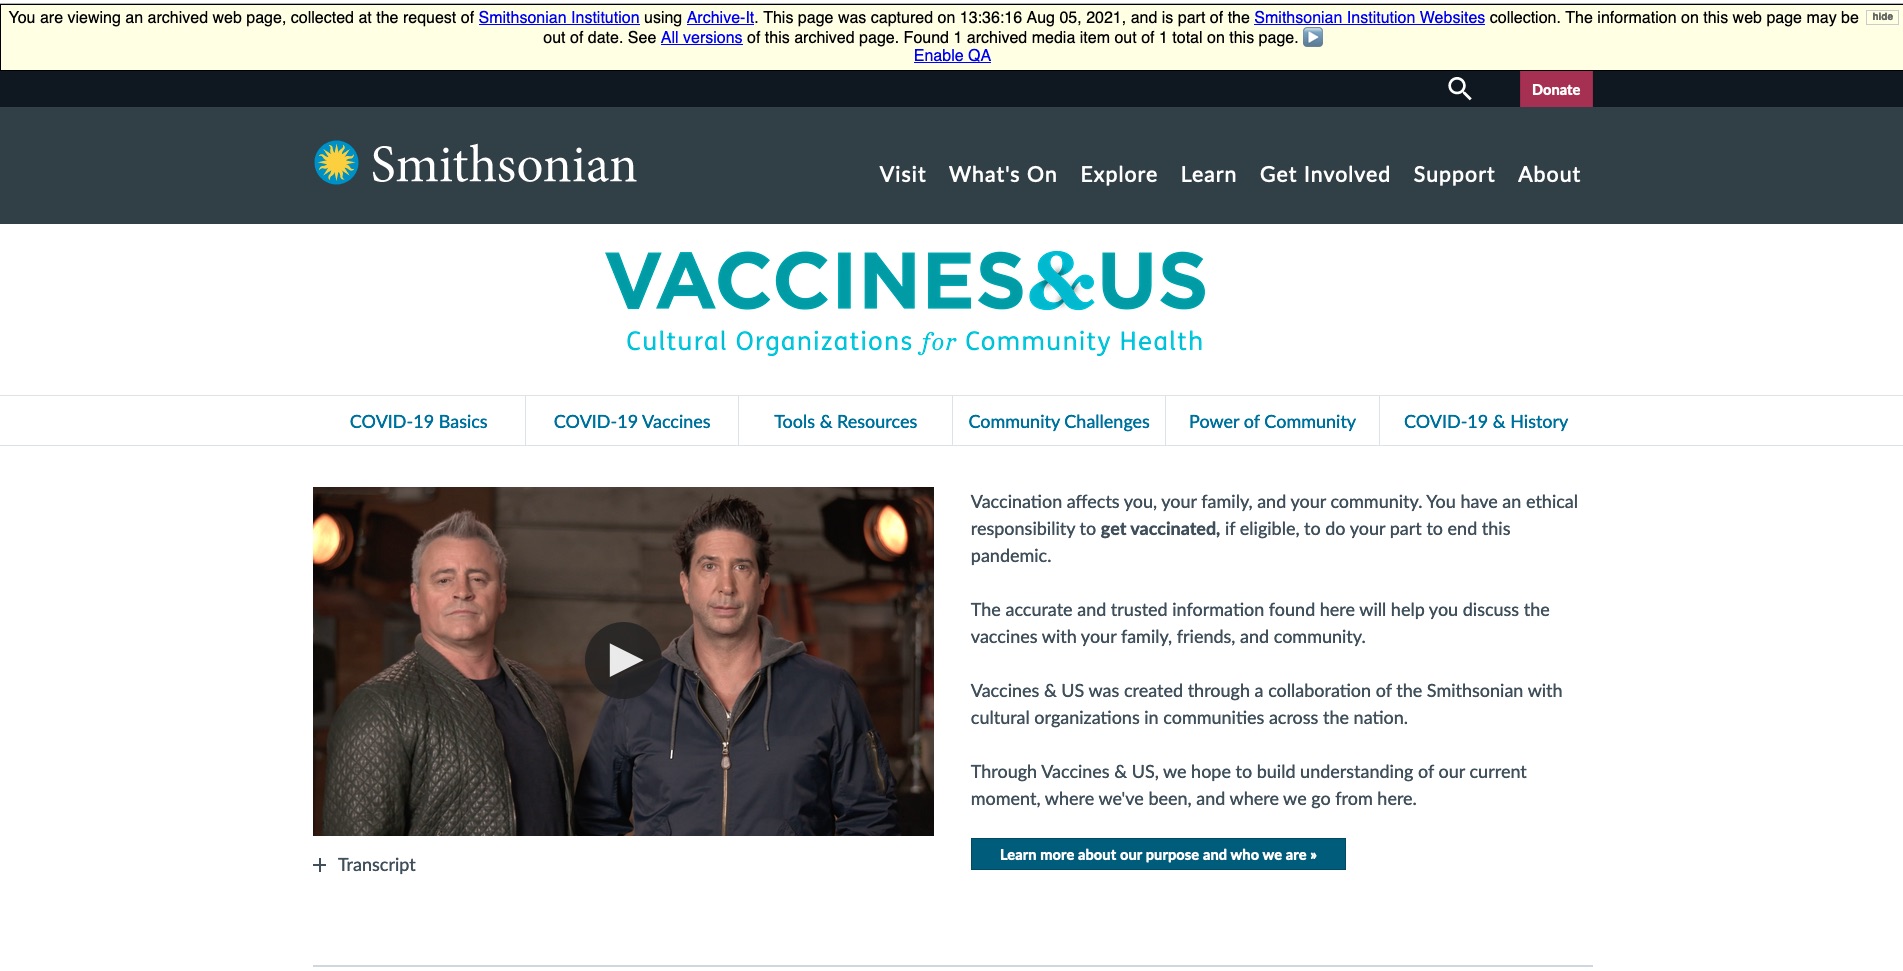 Screenshot of the Vaccines and US archived website that shows a banner noting it was archived August 5, 2021.